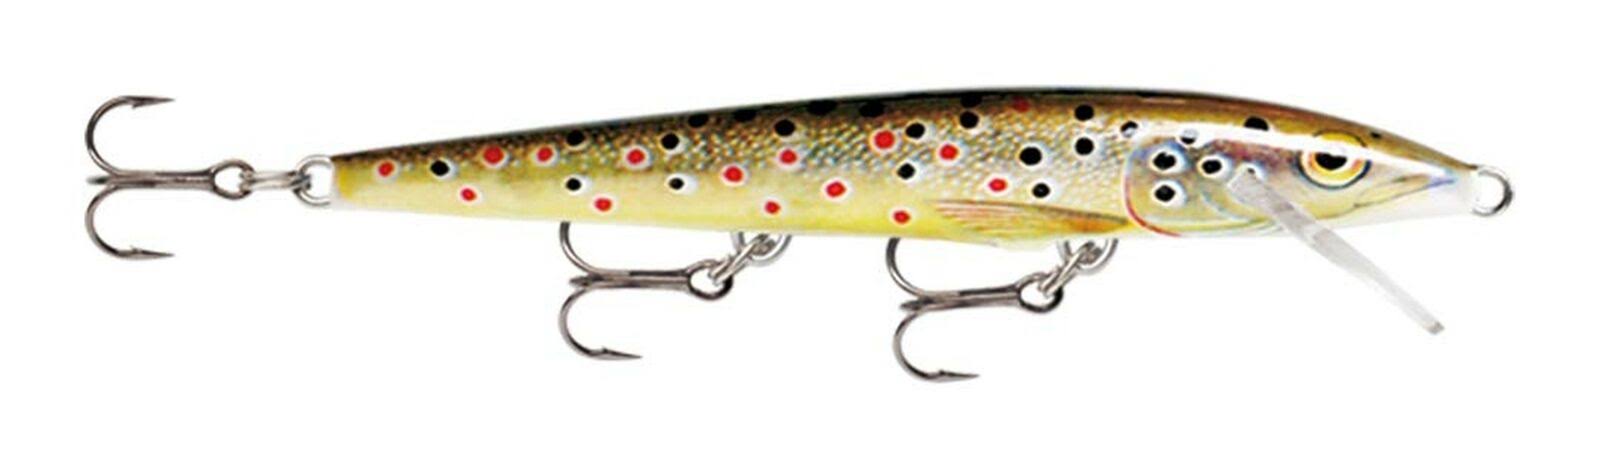 Rapala Original Floater 11 Fishing Lure - Brown Trout, 4.375"